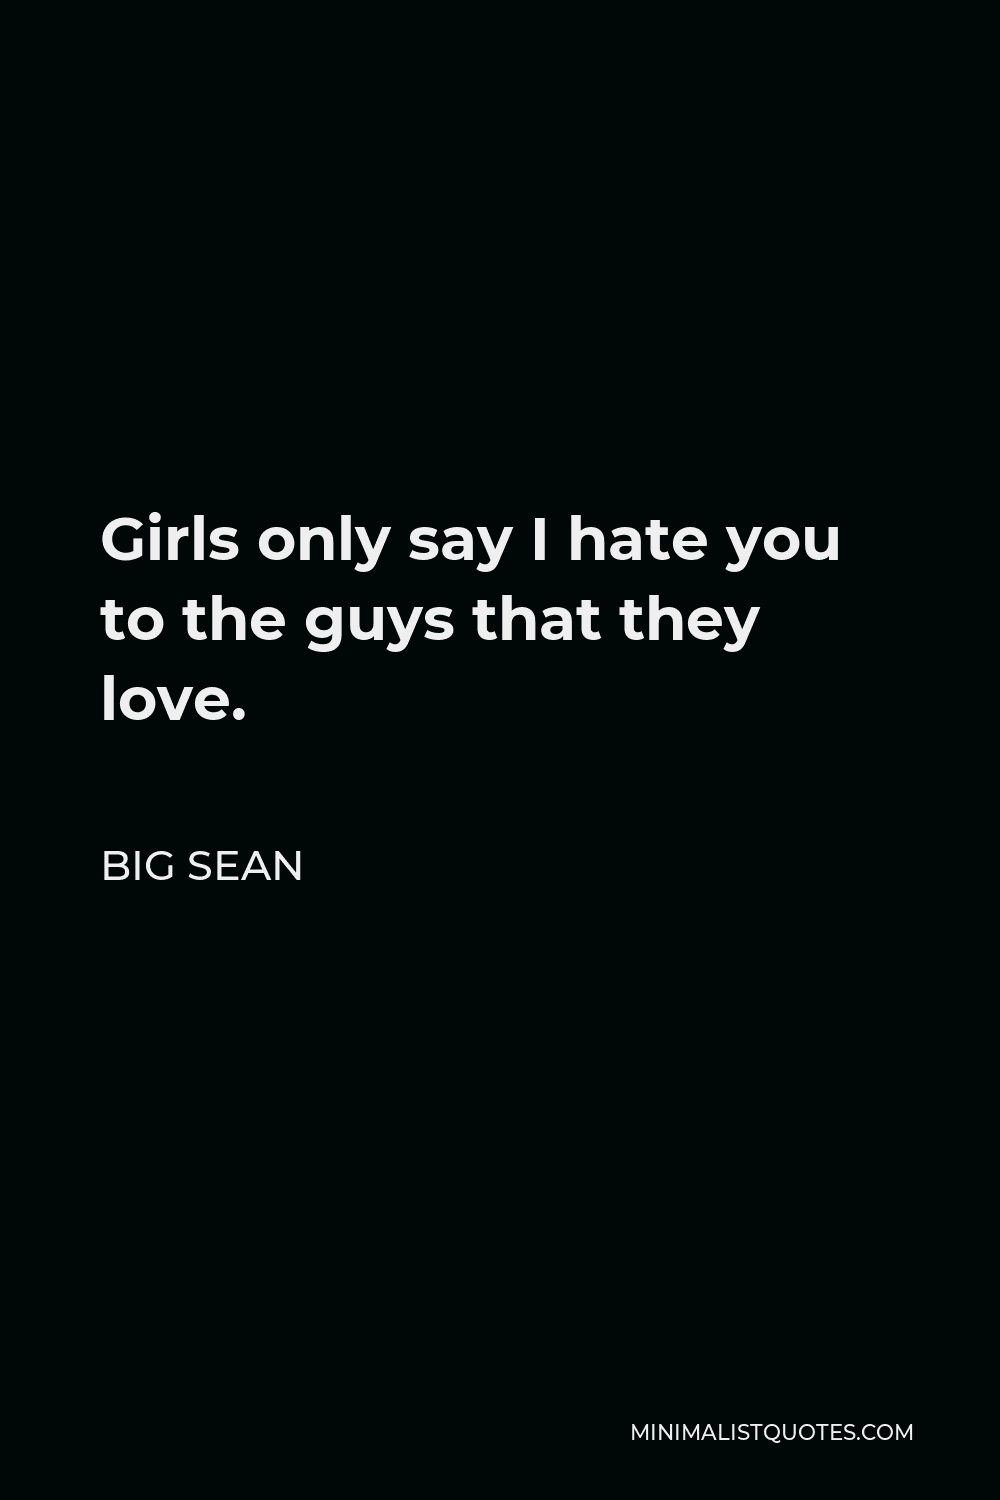 Big Sean Quote: Girls only say I hate you to the guys that they love.